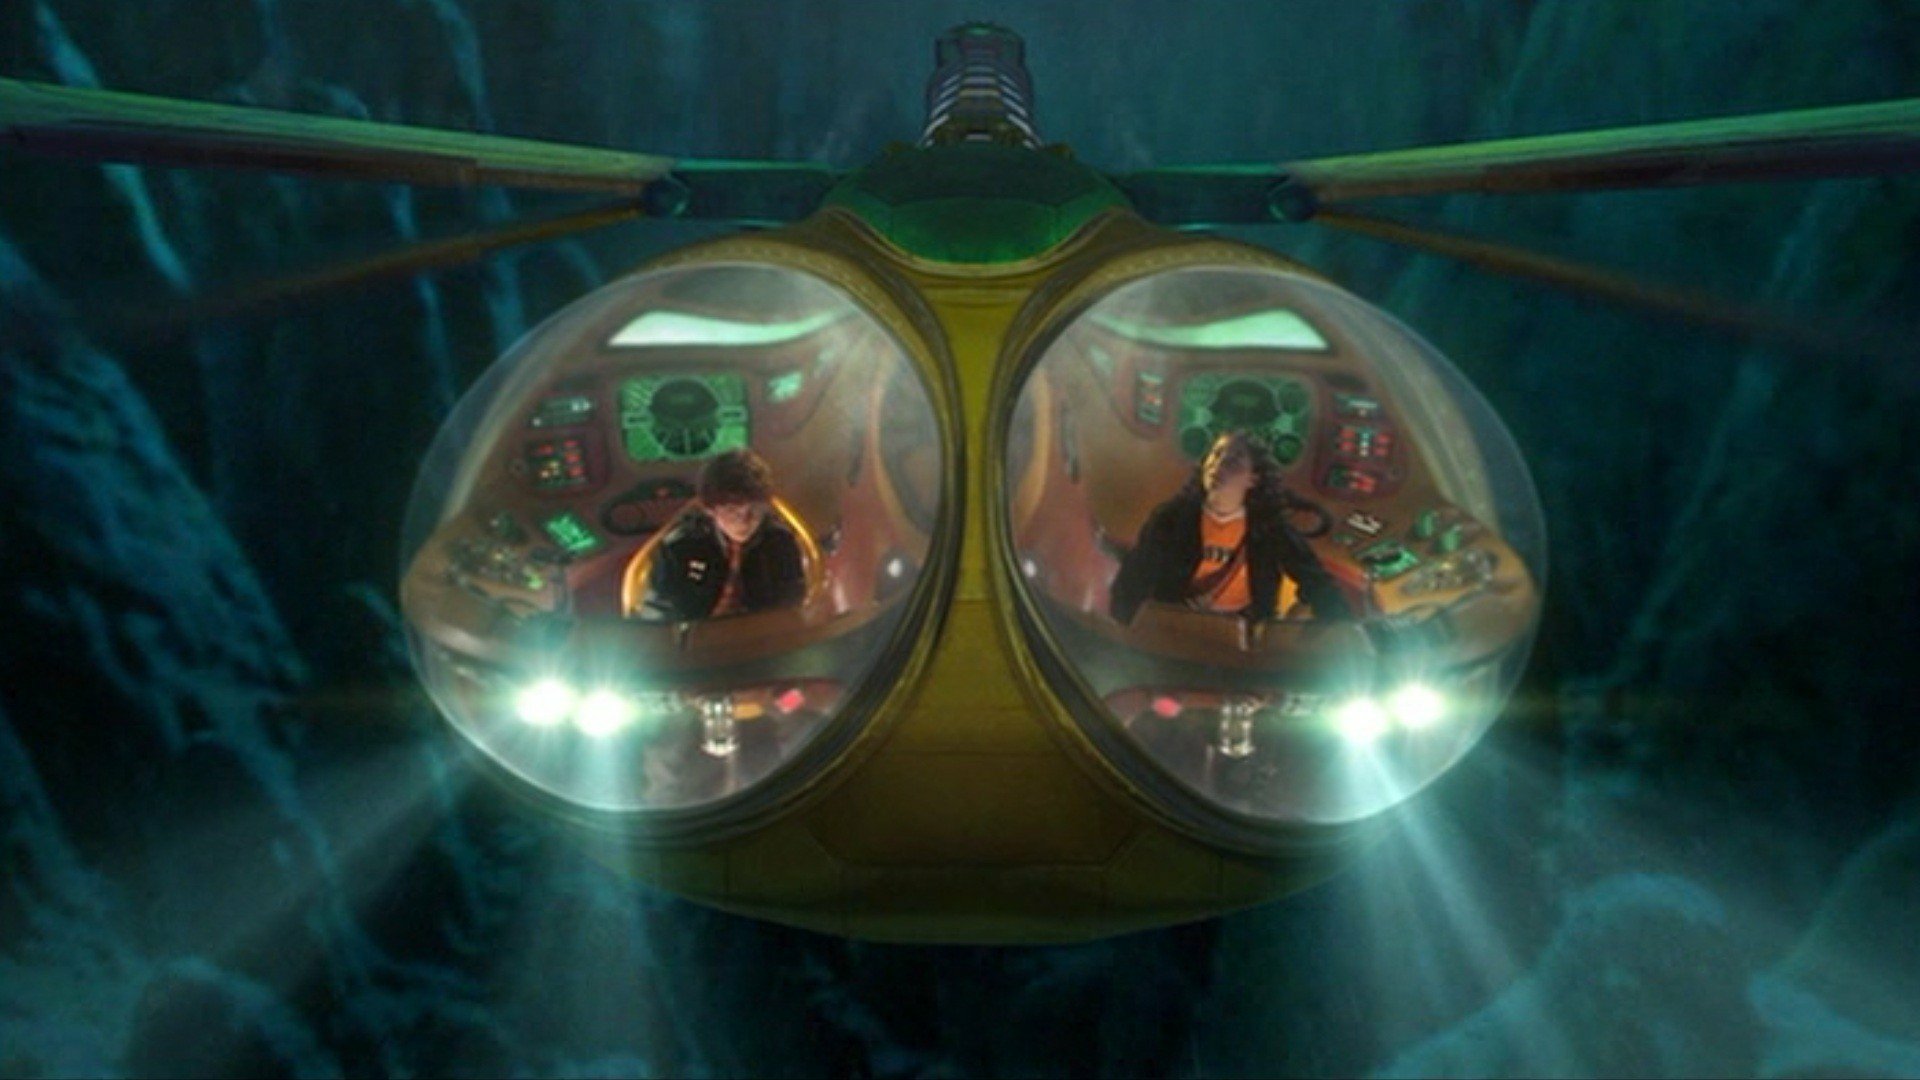 Spy Kids 2: The Island of Lost Dreams Full HD Wallpaper and Background